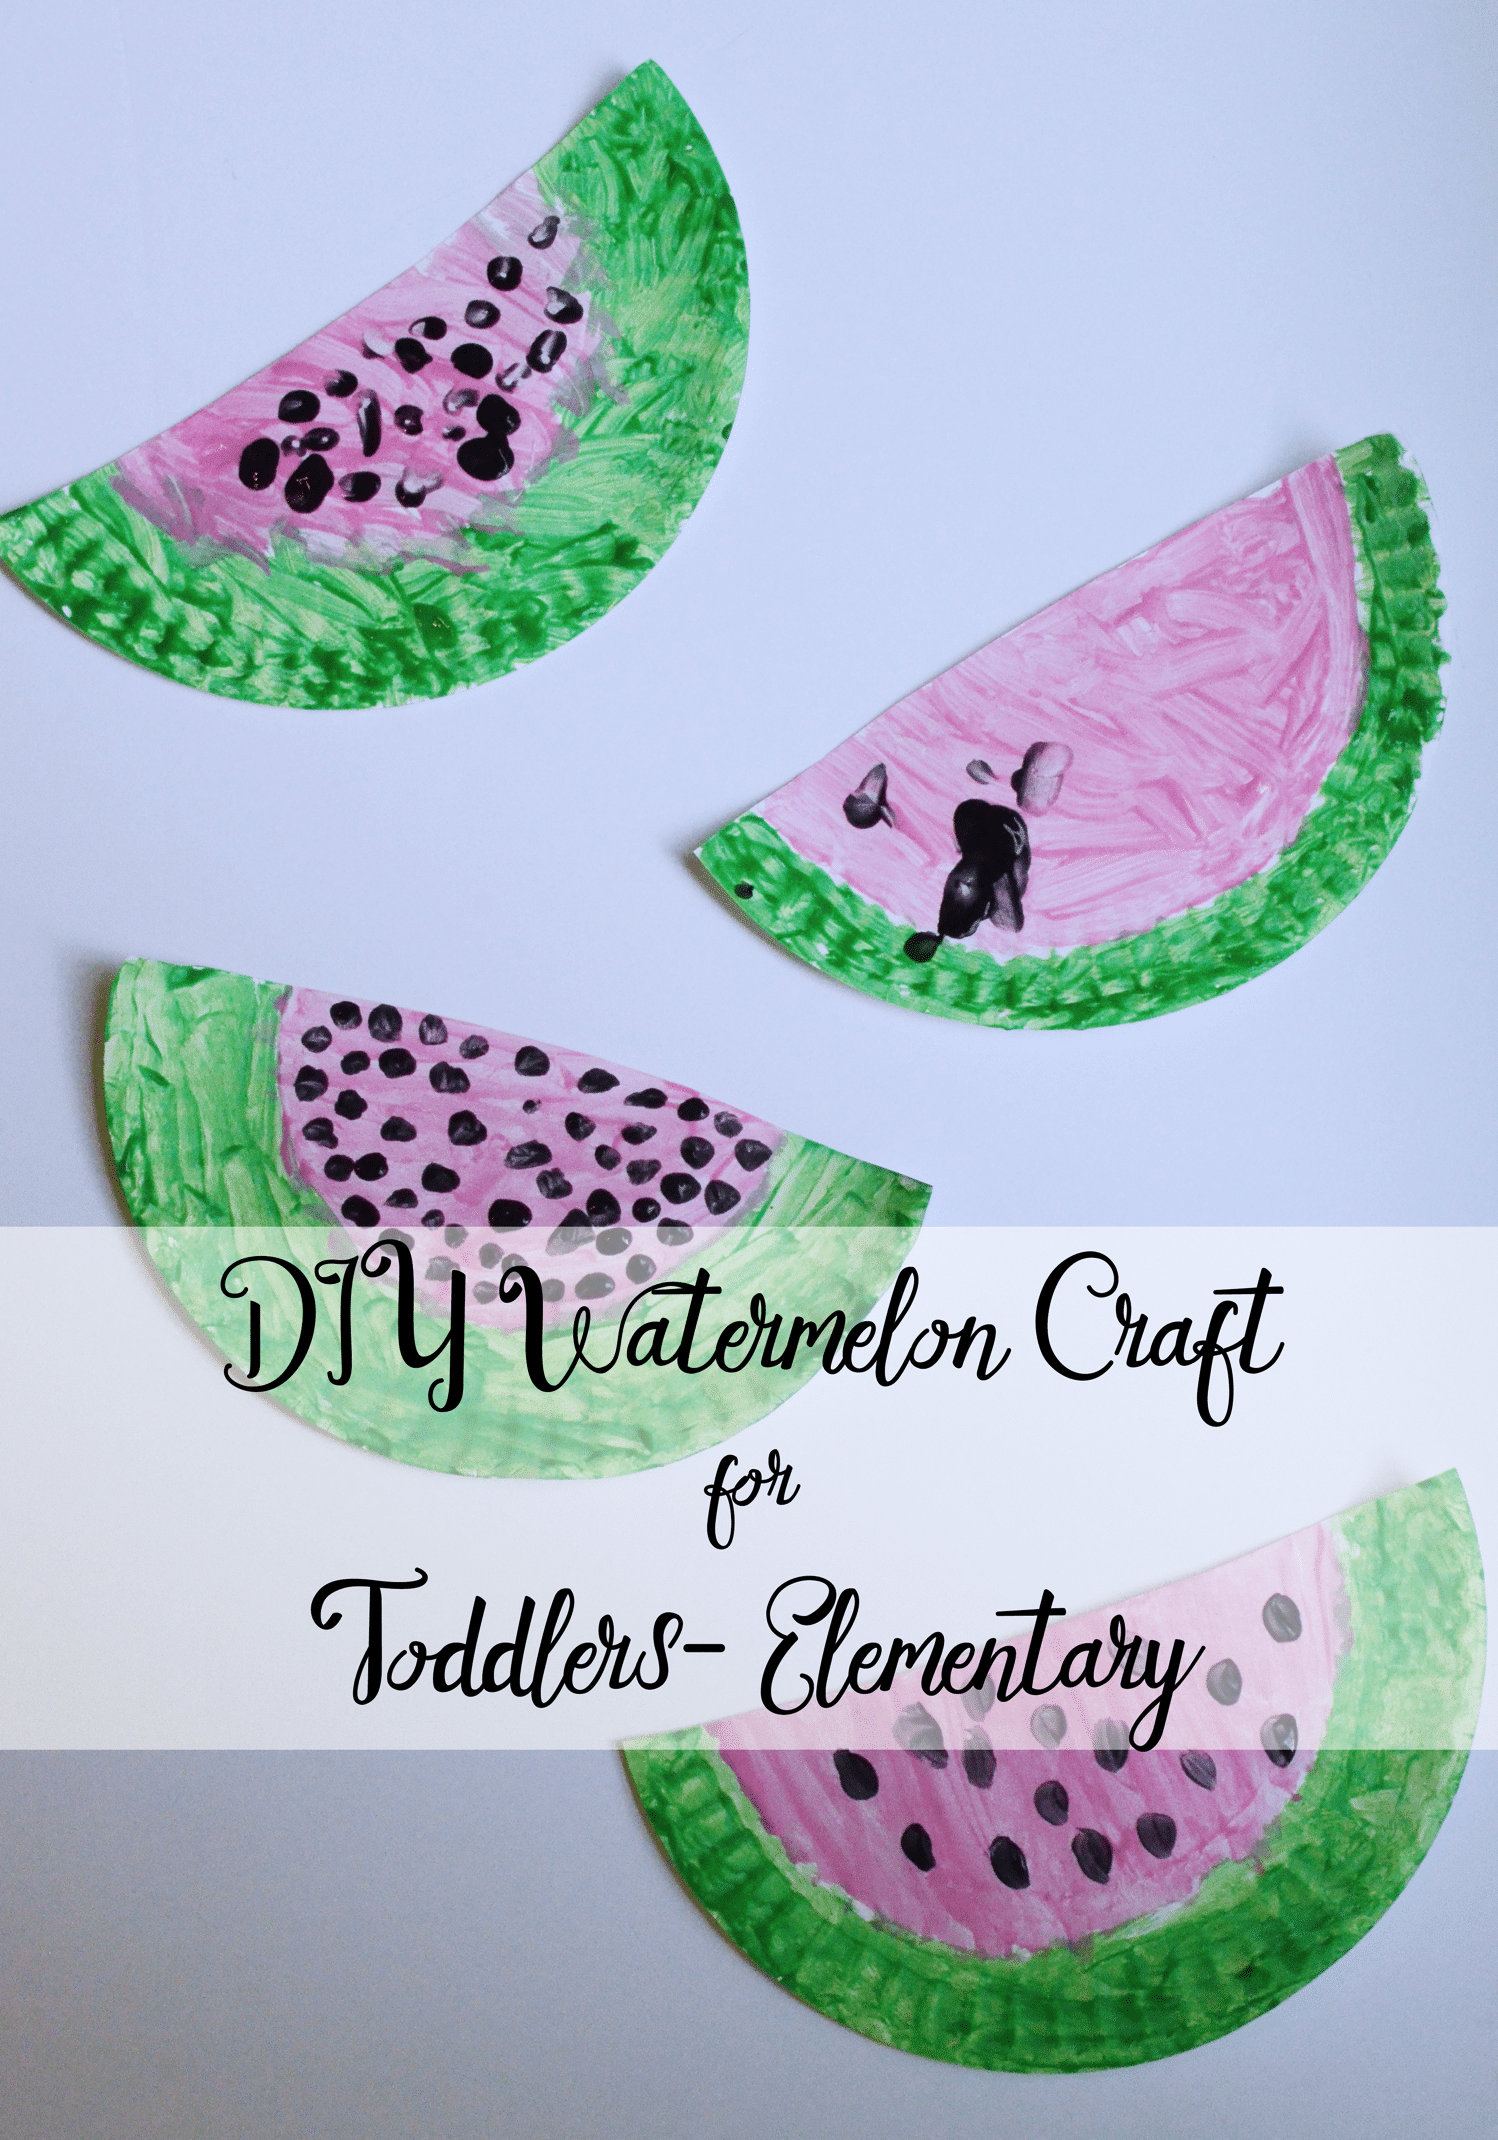 DIY Watermelon Craft for Toddlers - Elementary